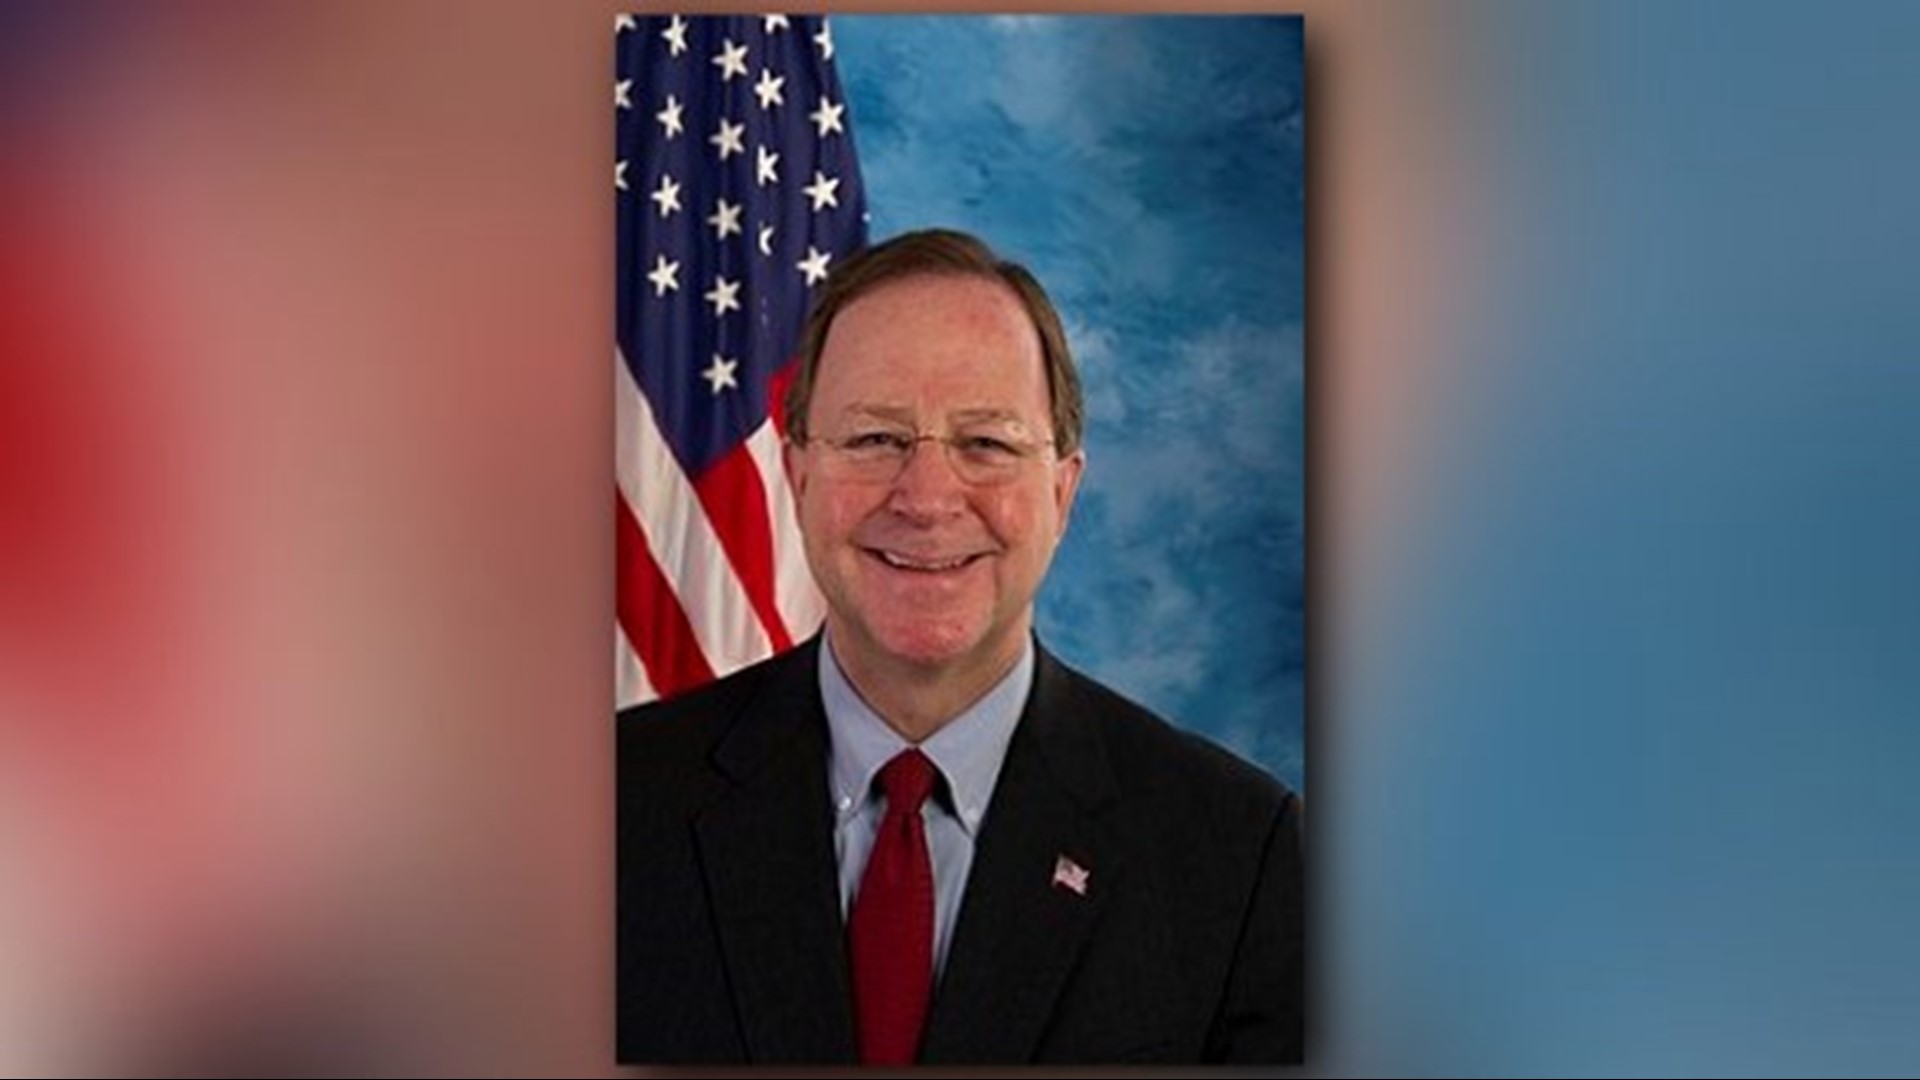 U.S. Representative Bill Flores posted to Twitter that after conversations with his wife he decided not to run for office again in 2020.